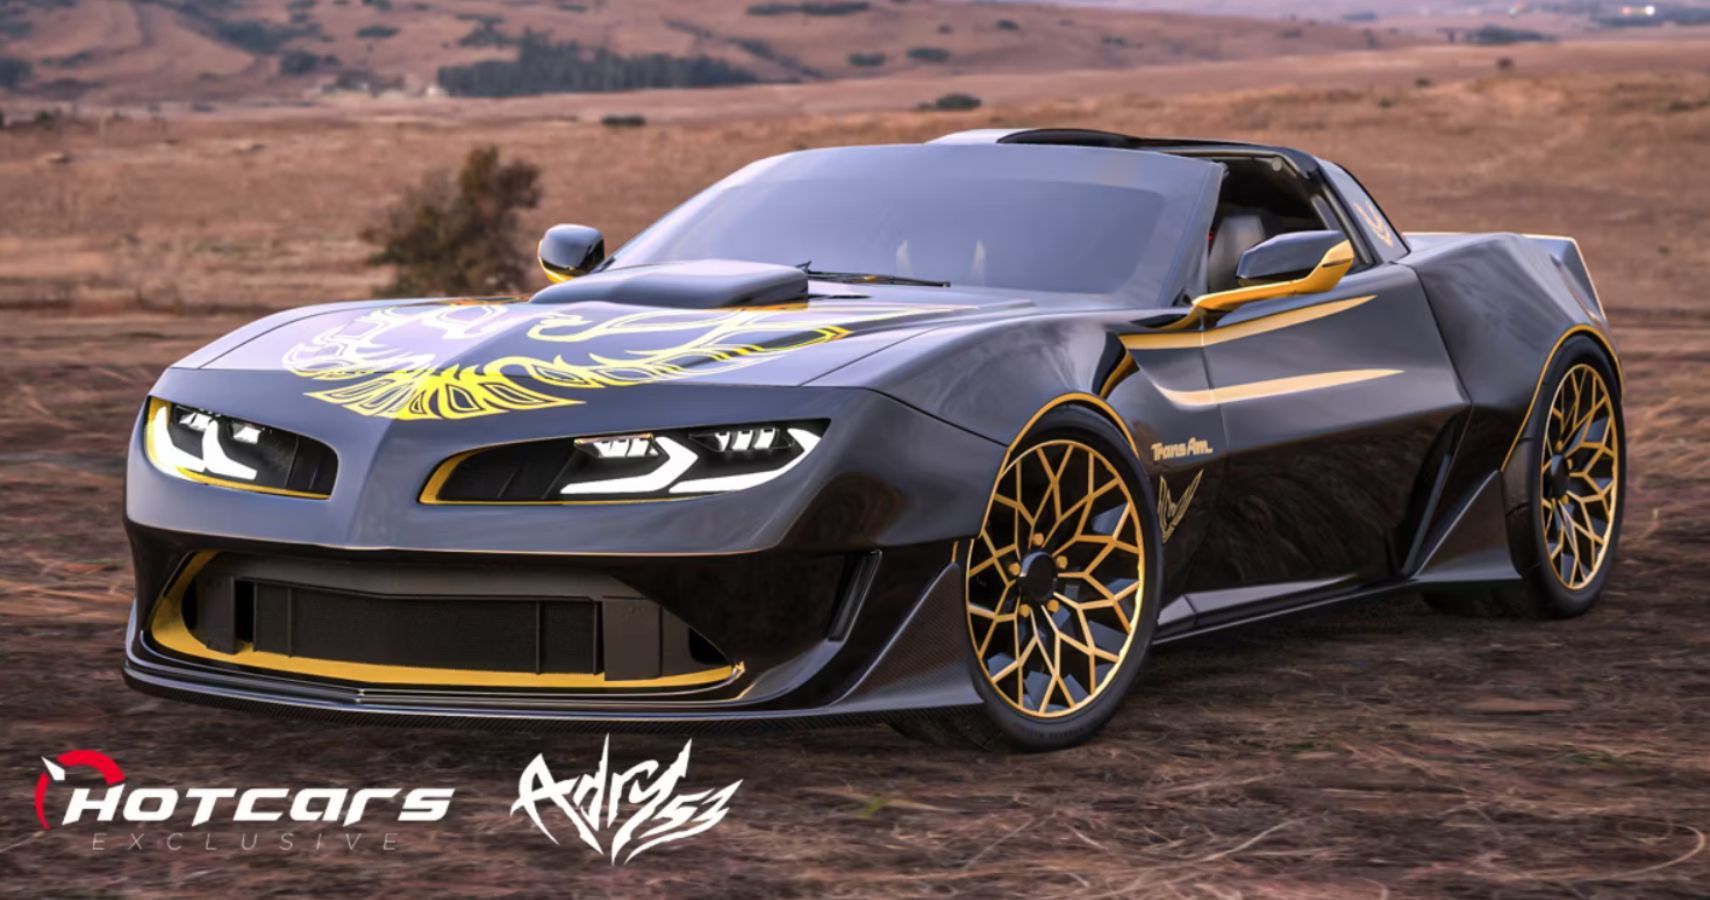 Why The Iconic Pontiac Firebird Trans Am Deserves A Comeback In 2023